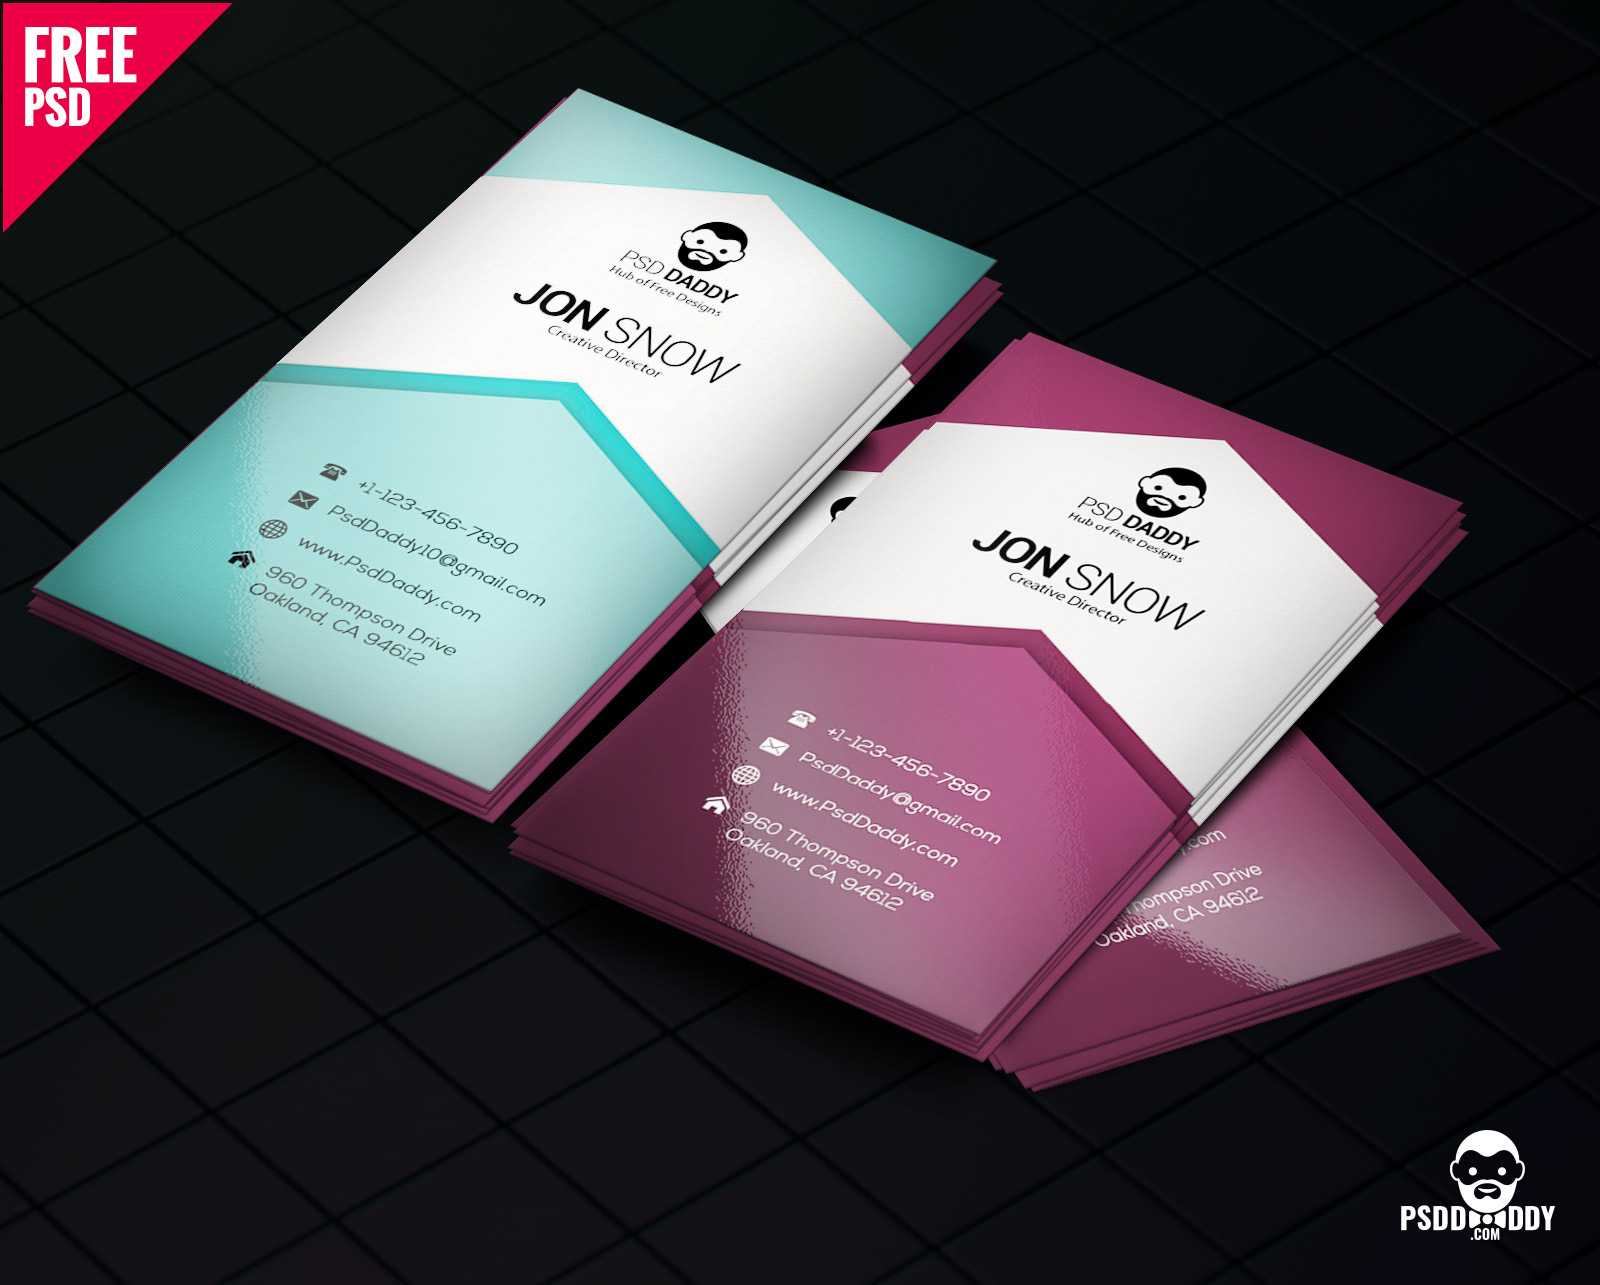 Download]Creative Business Card Psd Free | Psddaddy Inside Business Card Template Size Photoshop